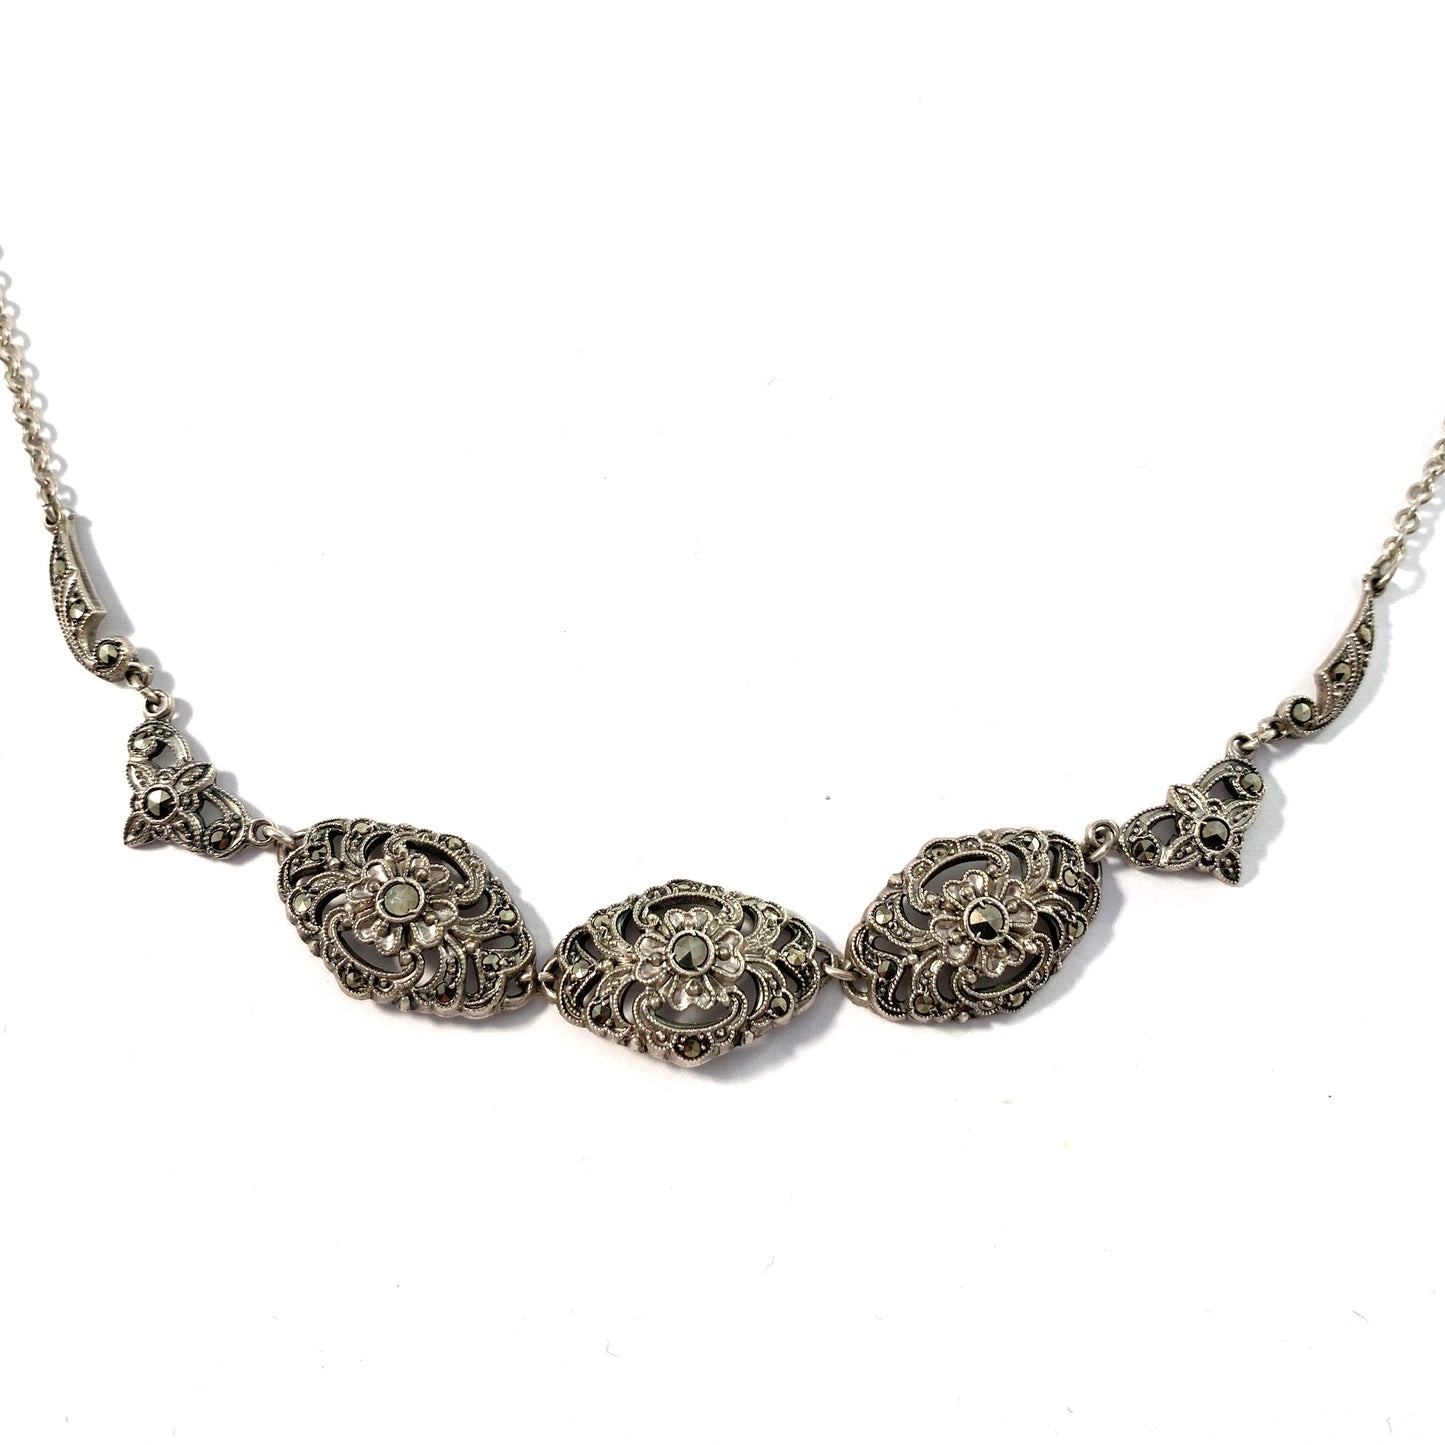 Germany / Austria 1930-40s Solid 835 Silver Marcasite Necklace.